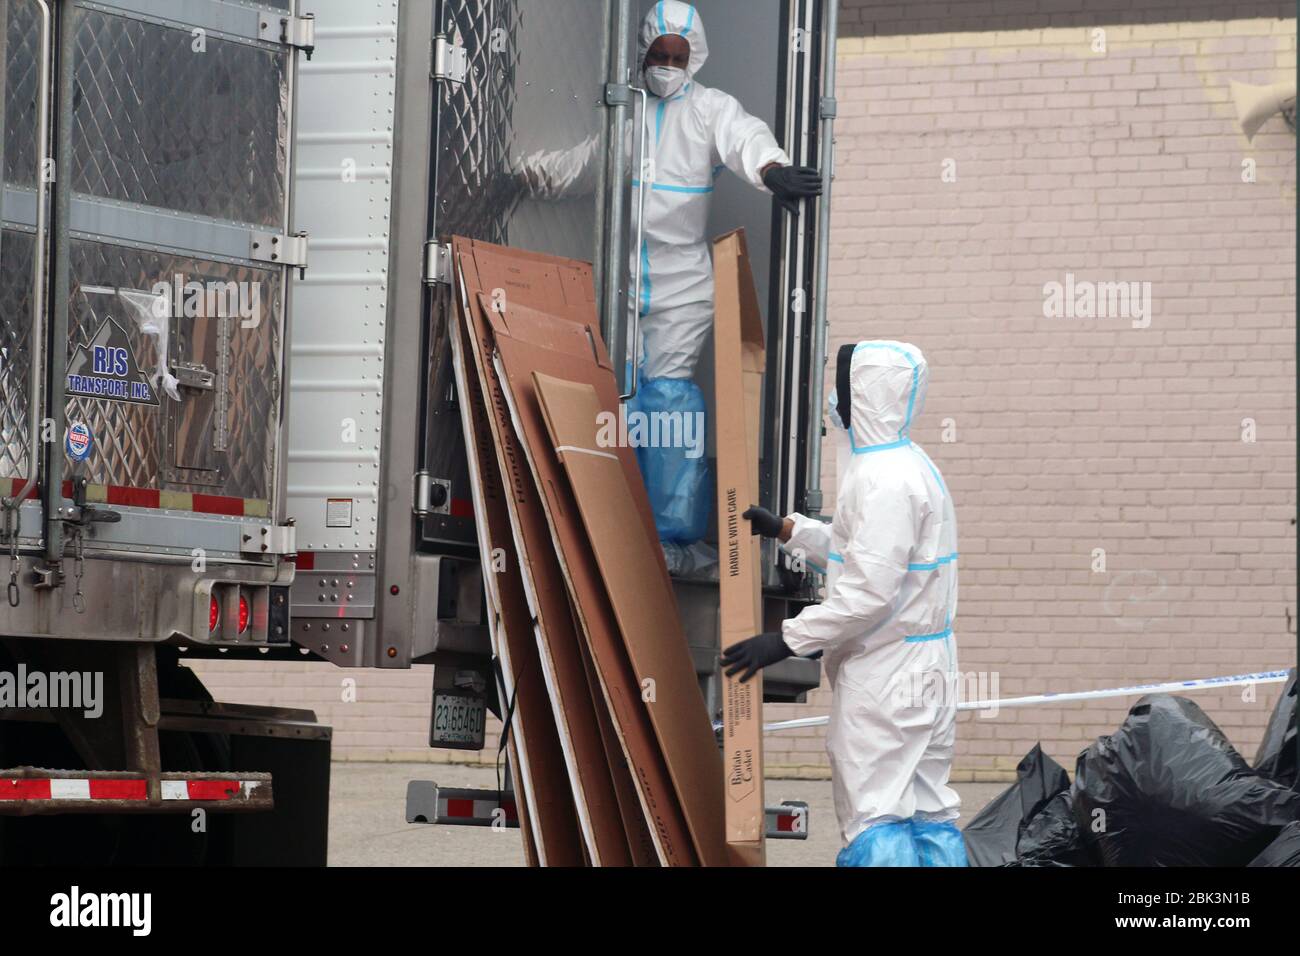 April 30, 2020, New York, New York, USA: These 2 men dressed in a hazmat, take cardboard coffins from a large refrigerated truck where bodies are stored next to the Andrew T. Cleckley Funeral Home in Brooklyn whose corpses not properly cared have been removed. 60 bodies were stored in 4 non-refregerated vehiciles lining the street nearby stores. Neighbors reported a foul smell still persistent and fluids dripping from the trucks. The funeral home was overwhelmed by COVID-19 deaths, waiting for weeks for cremations in New York. (Credit Image: © Marie Le Ble/ZUMA Wire) Stock Photo